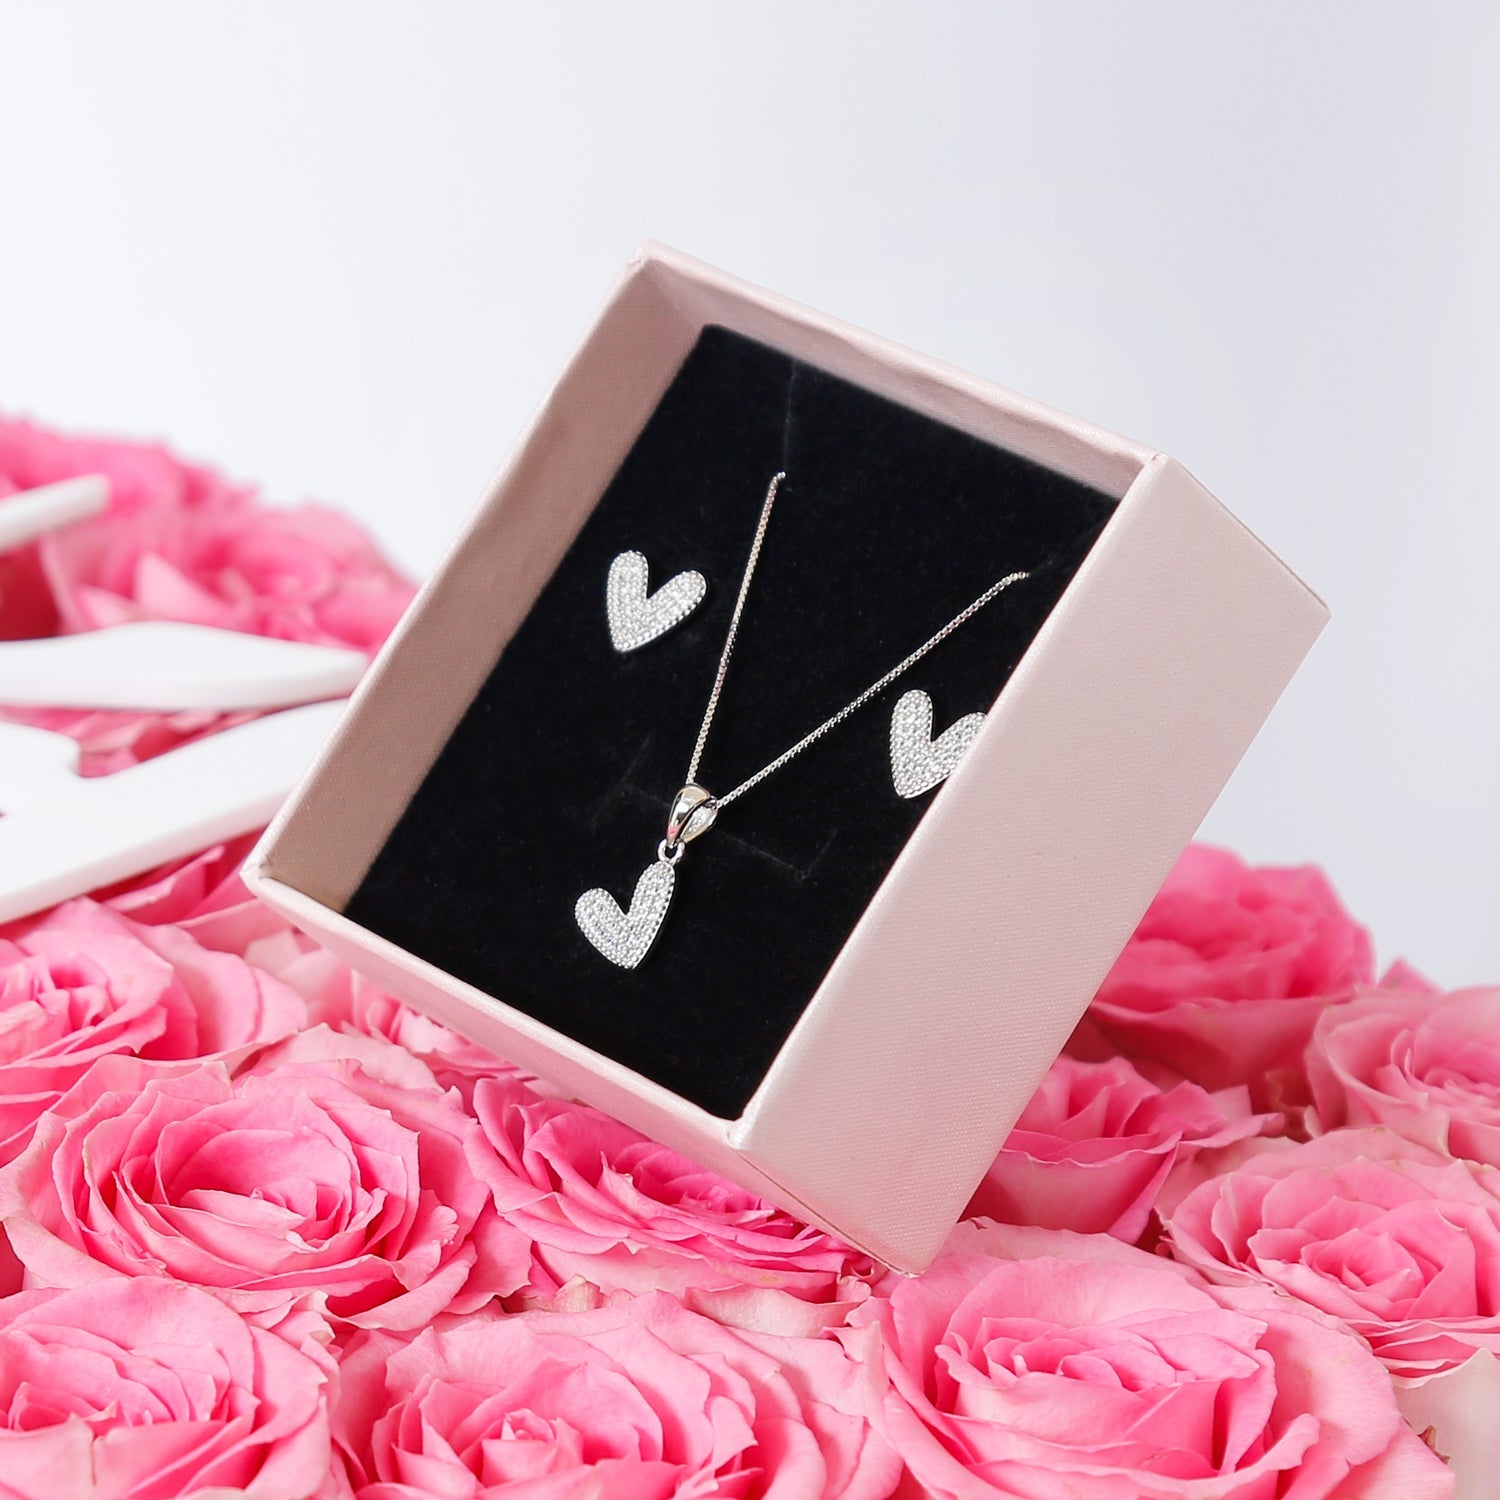 Beautiful Pink Roses Arrangement and Jewelry for Mom